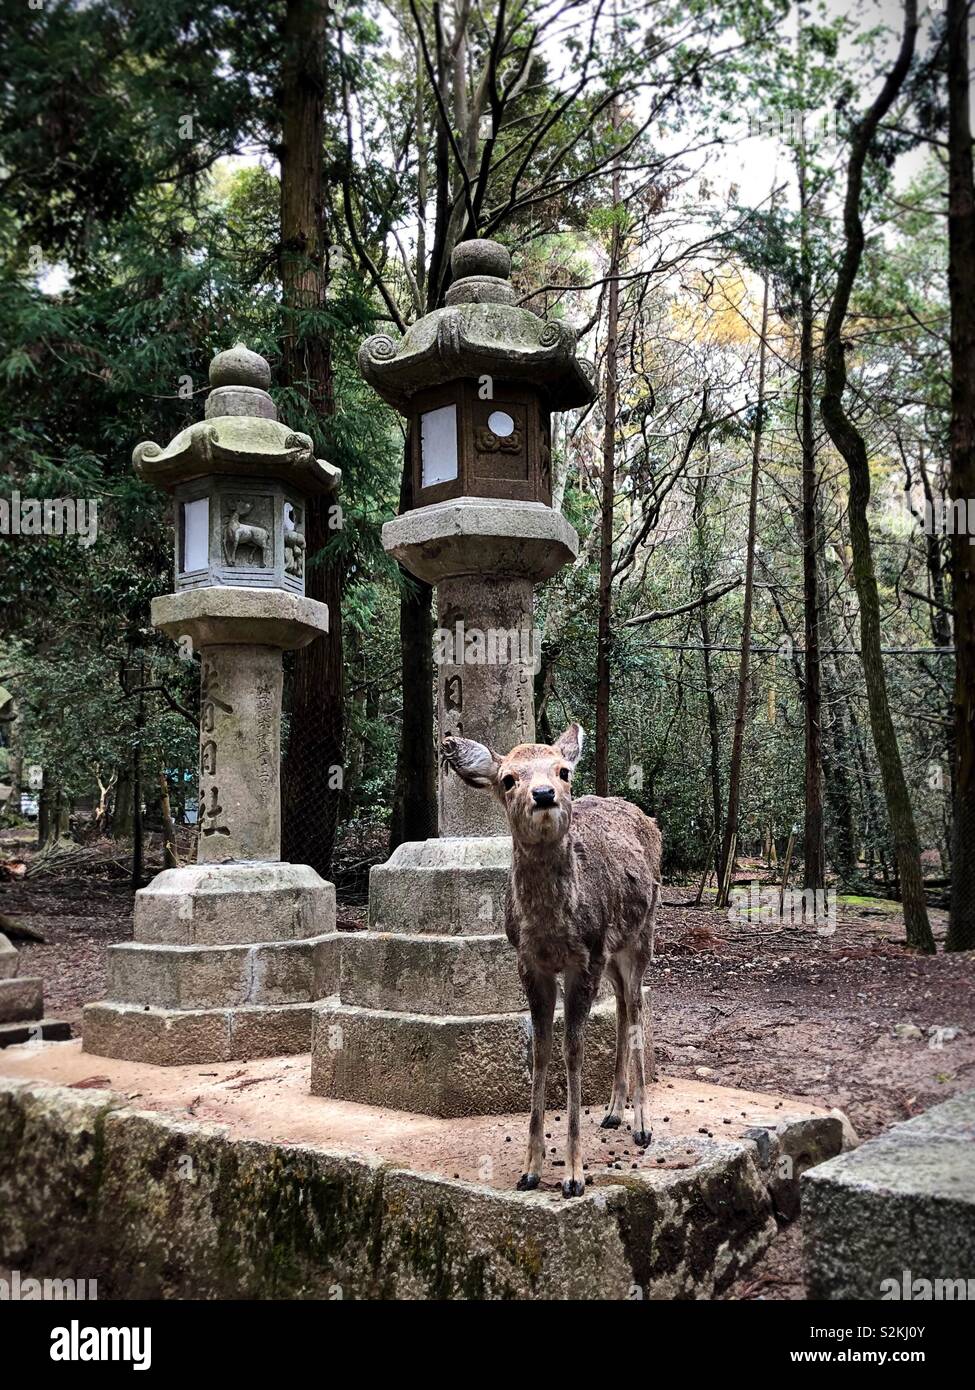 A young deer standing next to stone lanterns in Nara, Japan. Stock Photo